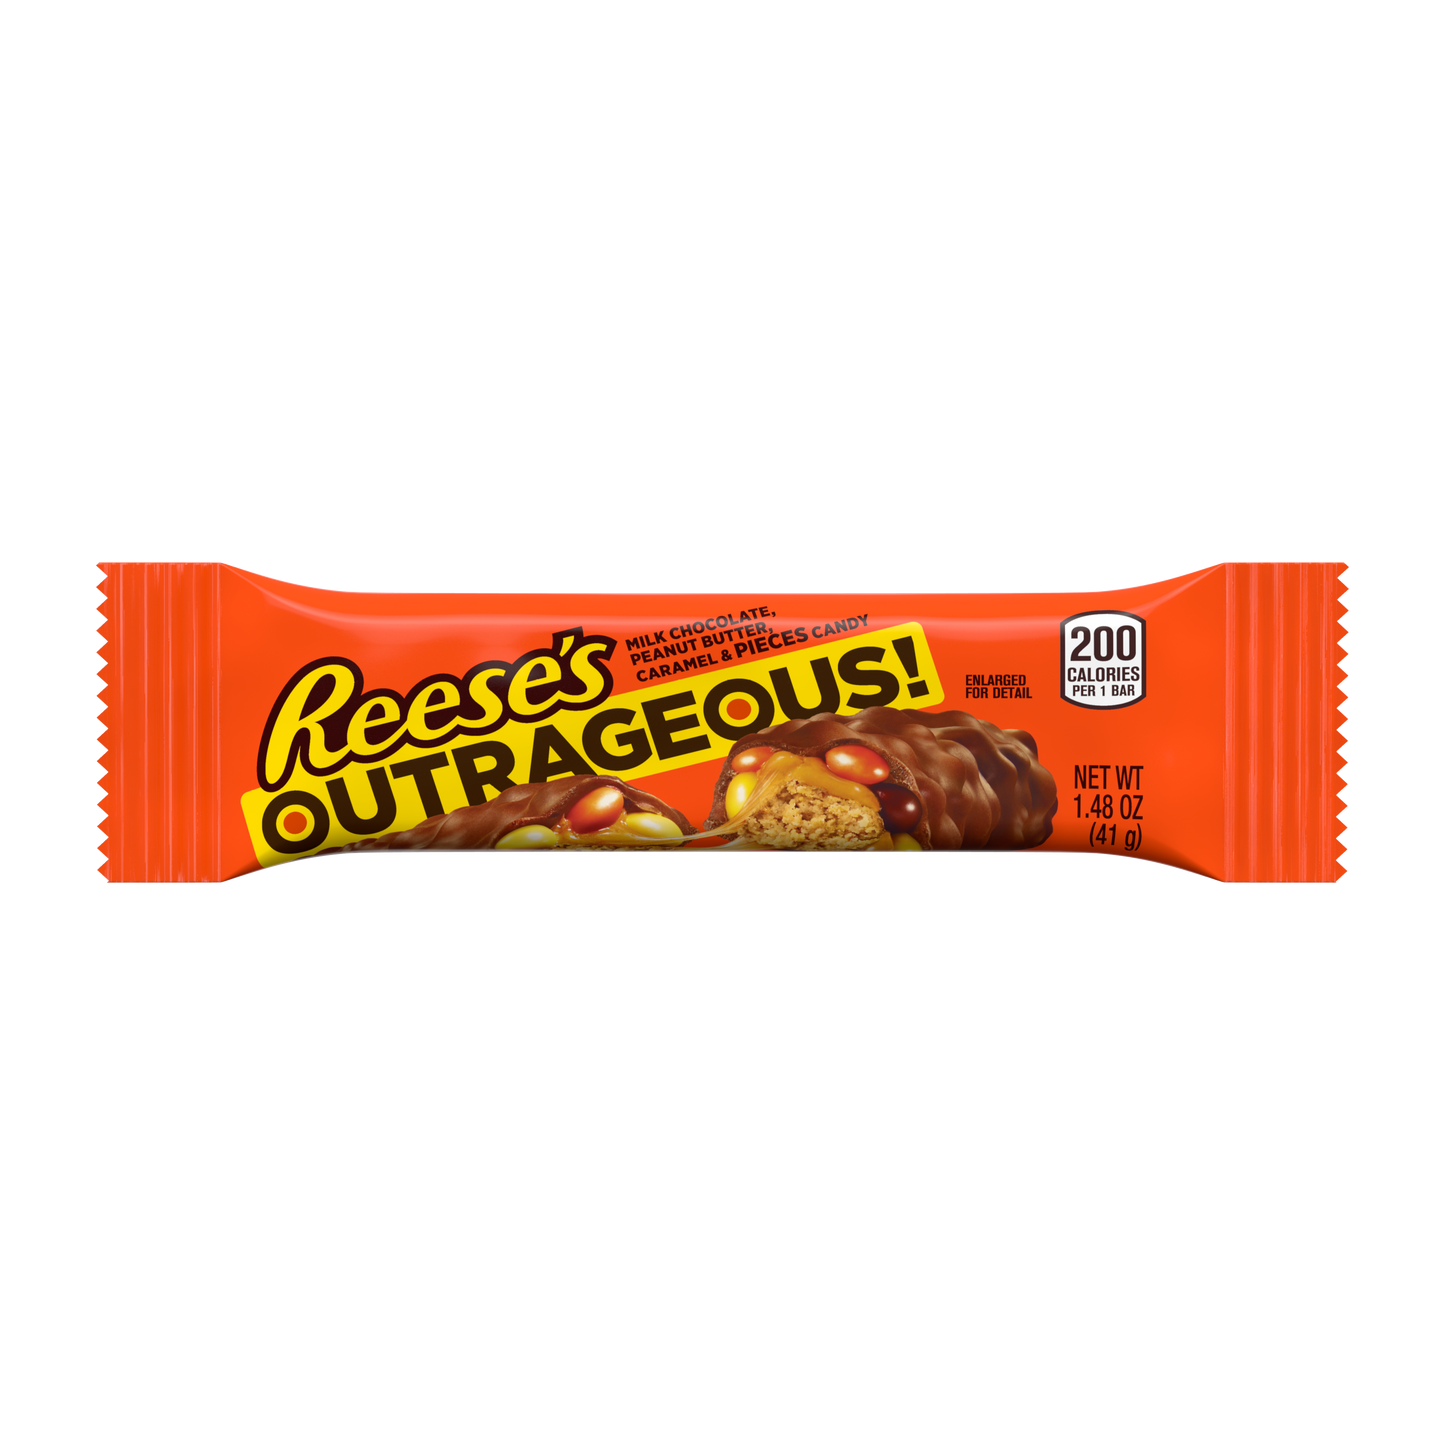 Reese’s - Outrageous